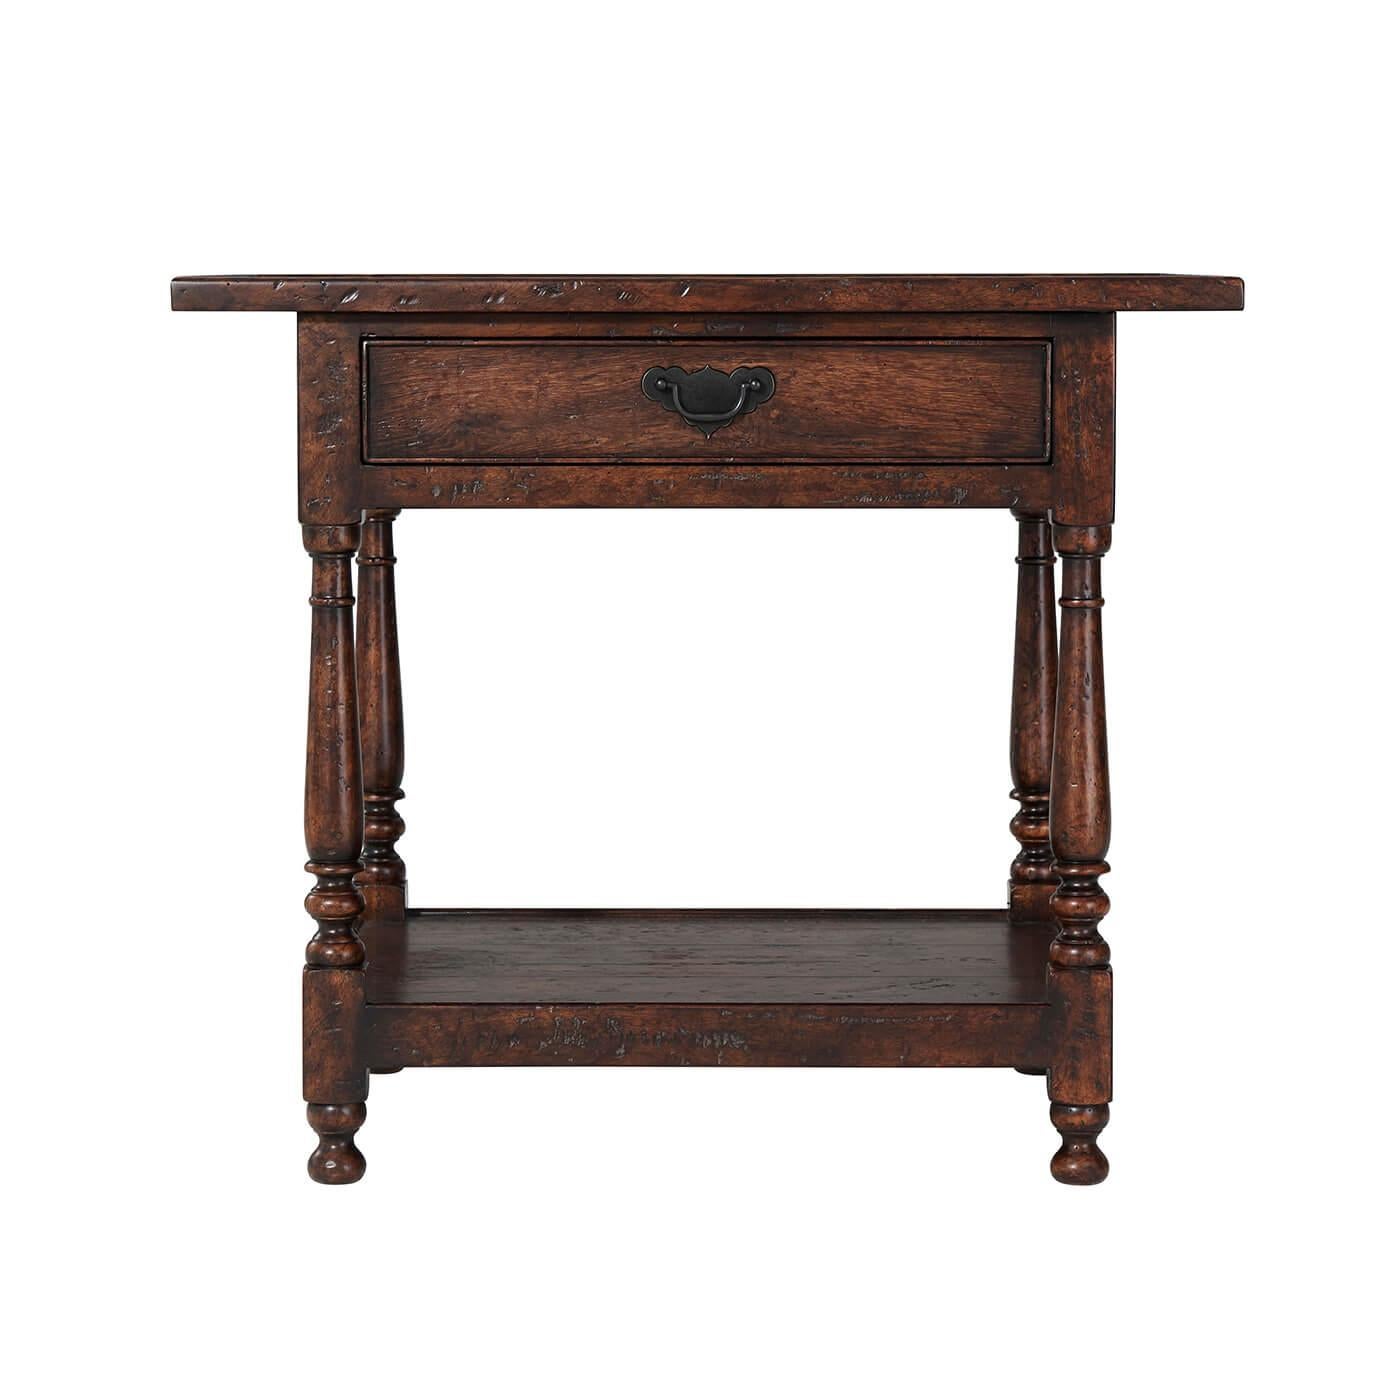 A William and Mary style reclaimed oak veneered and mahogany accent table, the planked top with a raised edge, above a frieze drawer and baluster turned legs joined by an under tier, on bun feet.

Dimensions: 30